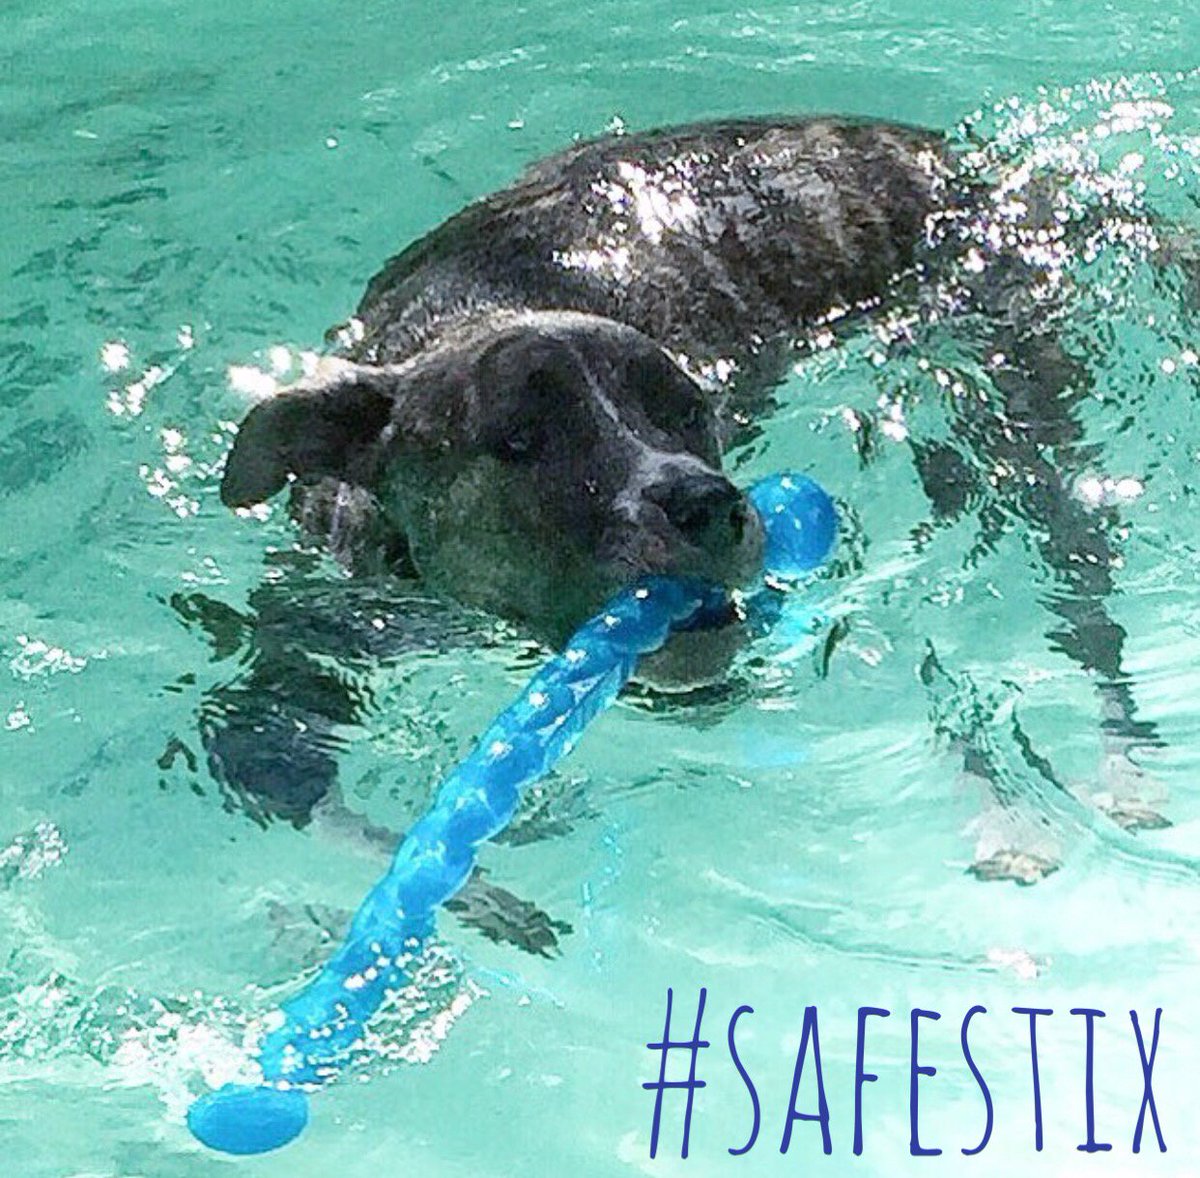 Safestix floats! Don’t forget to use it in the water too! Amazing pic by @my.name.is.milk ❤️ #Safestix #Kong #Kongtoys #endbsl #bullbreeds #pitbull #pitlove #flopdontcrop #dontbully #swim #bluewater #swimdog #fetch #catch #getit #swimmingpool #mynameismilk #pitbulllove #dogs